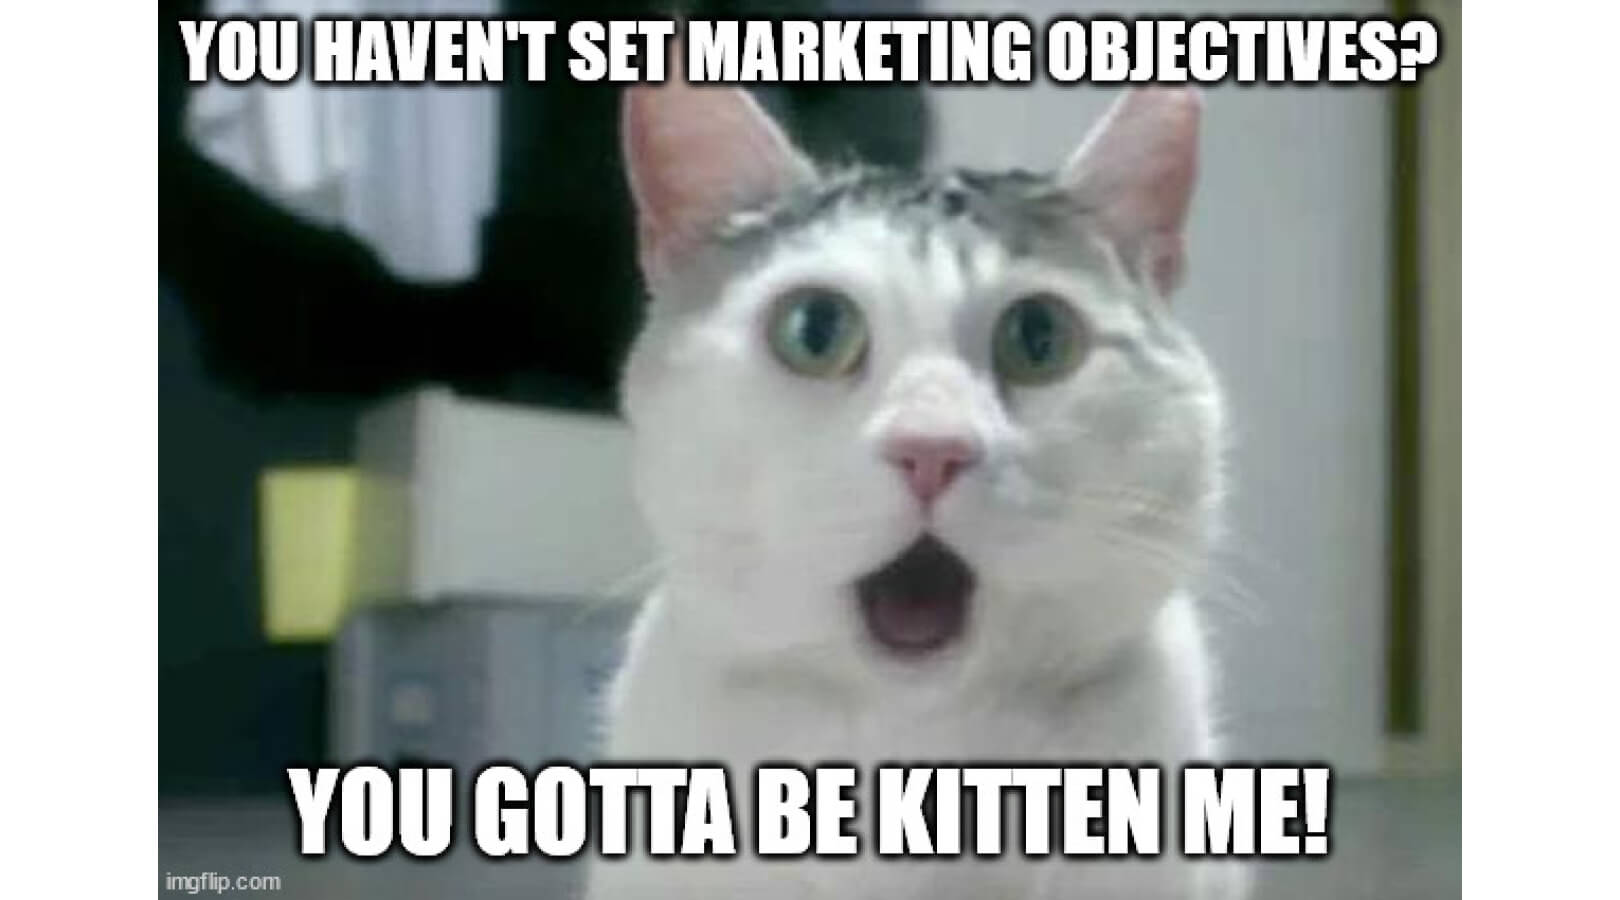 Why Are Marketing Objectives Important